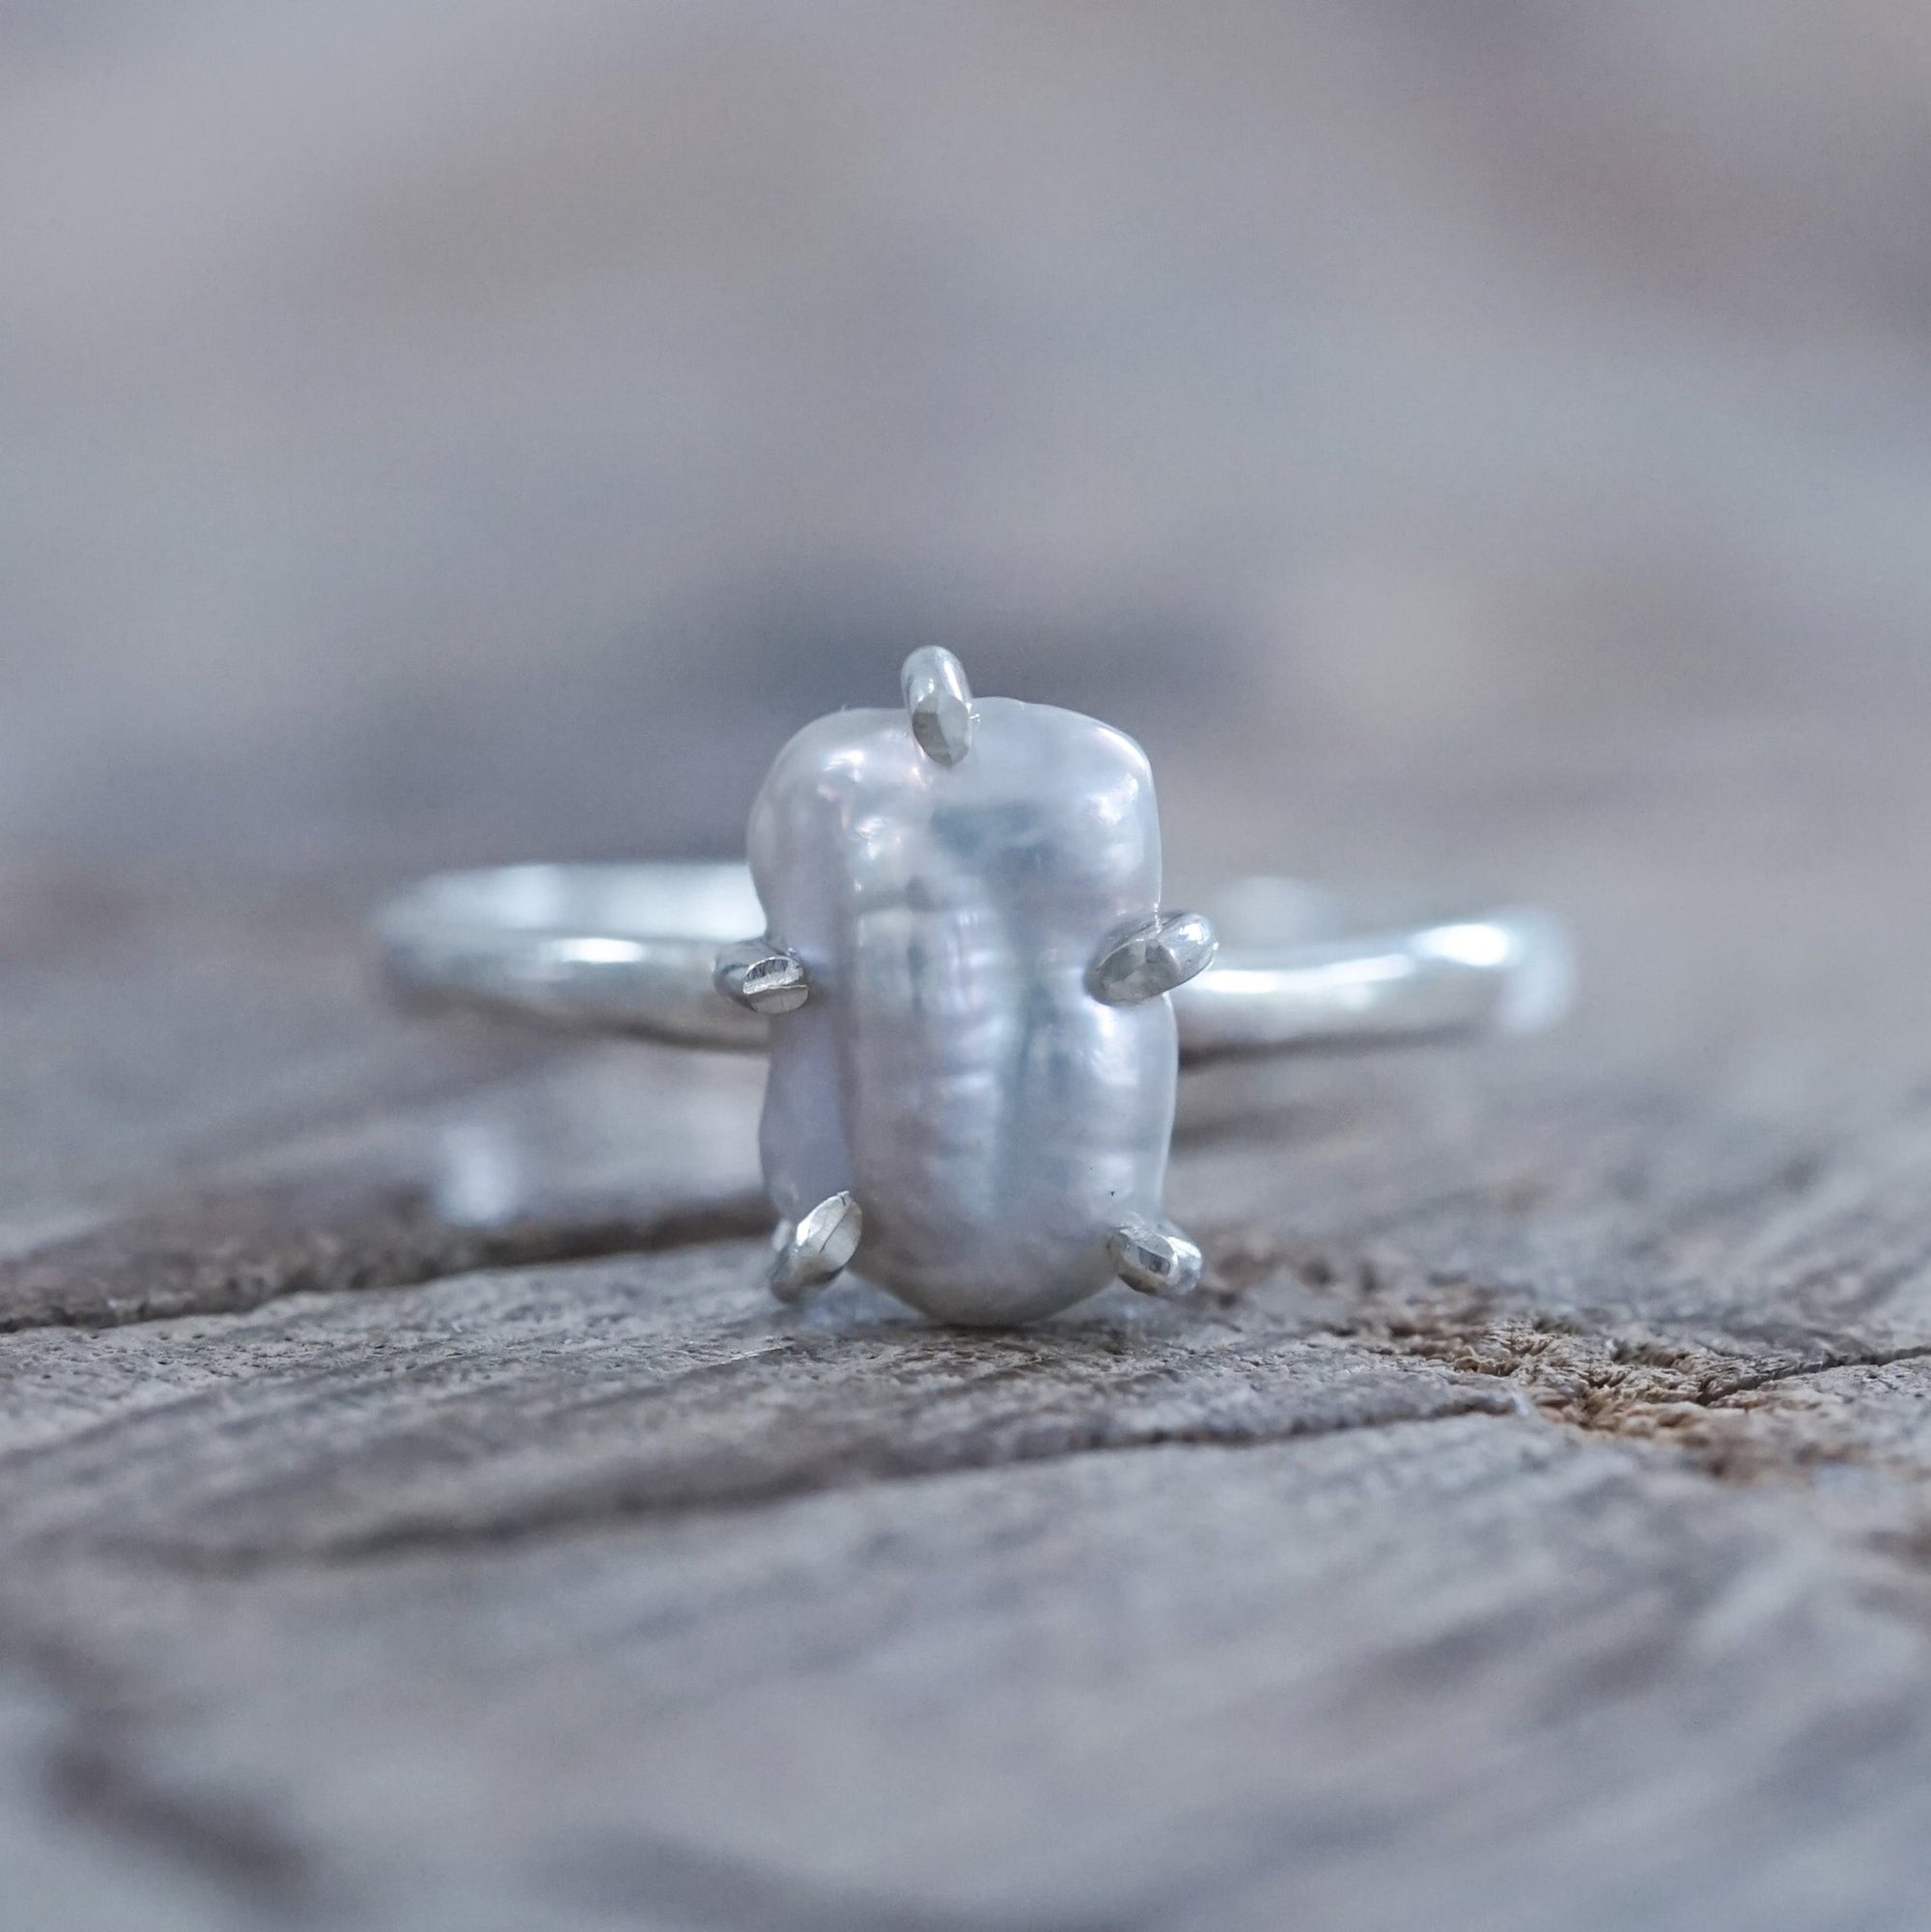 Keshi Pearl Ring with Prongs - Gardens of the Sun | Ethical Jewelry